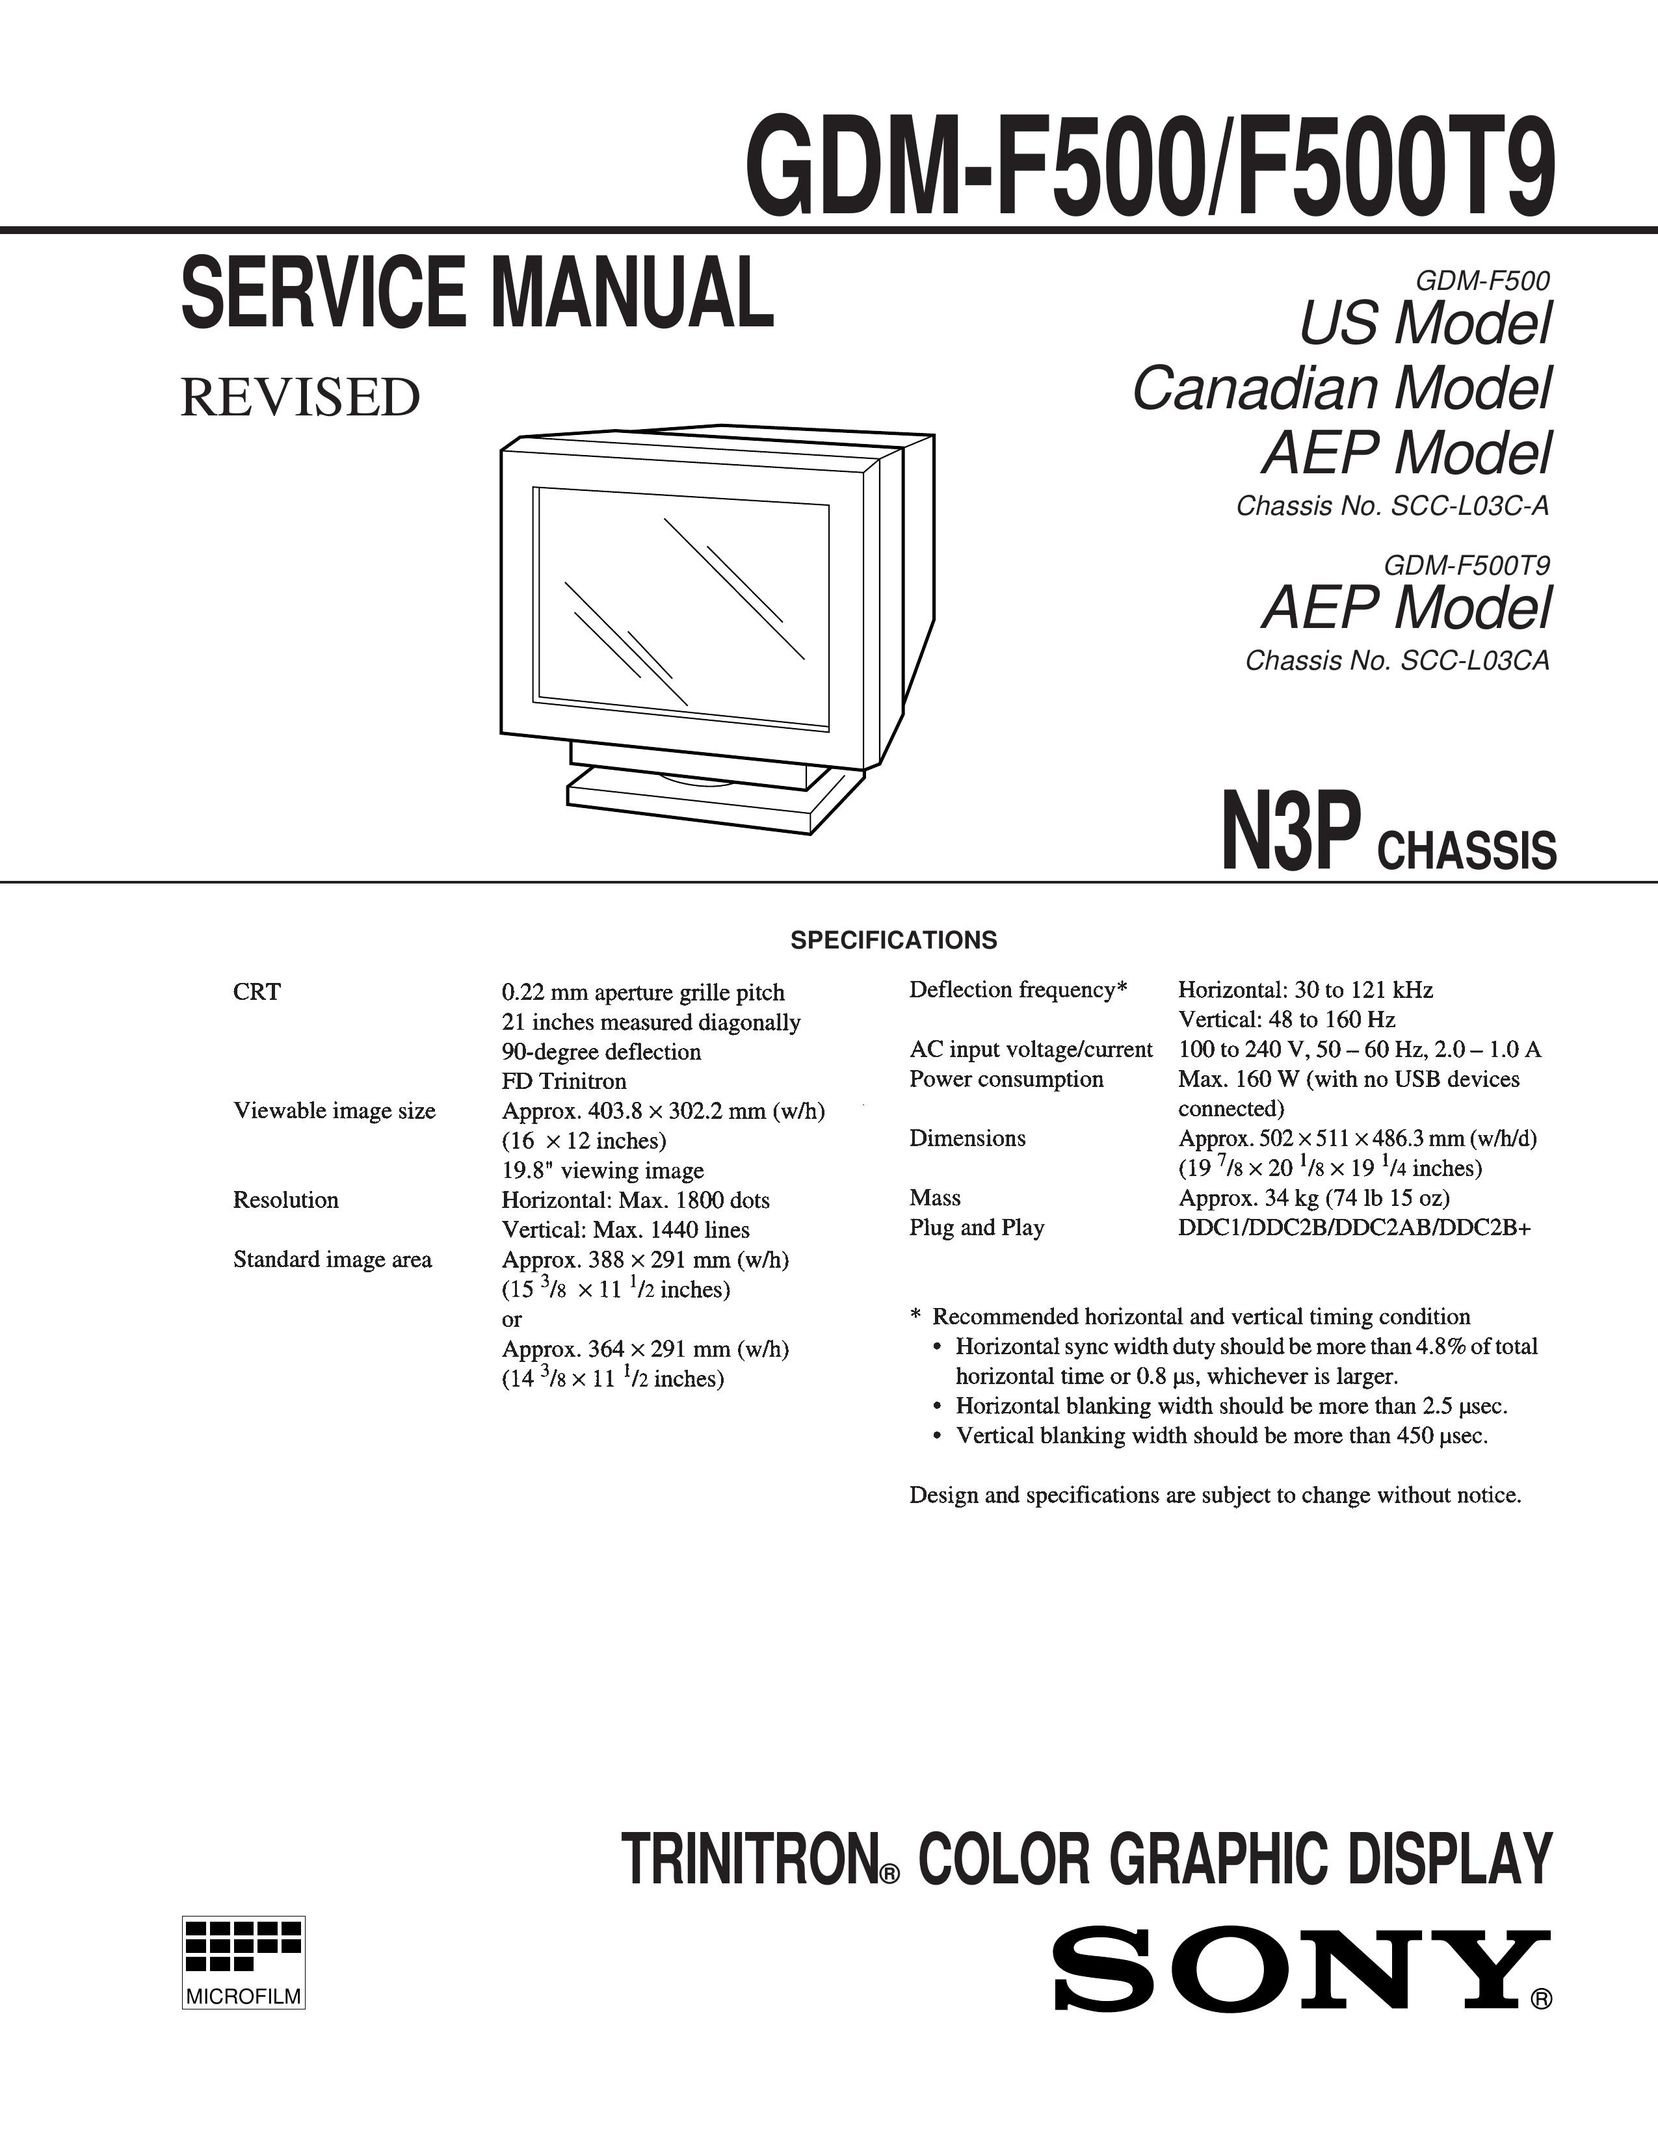 Sony GDM-F500 CRT Television User Manual